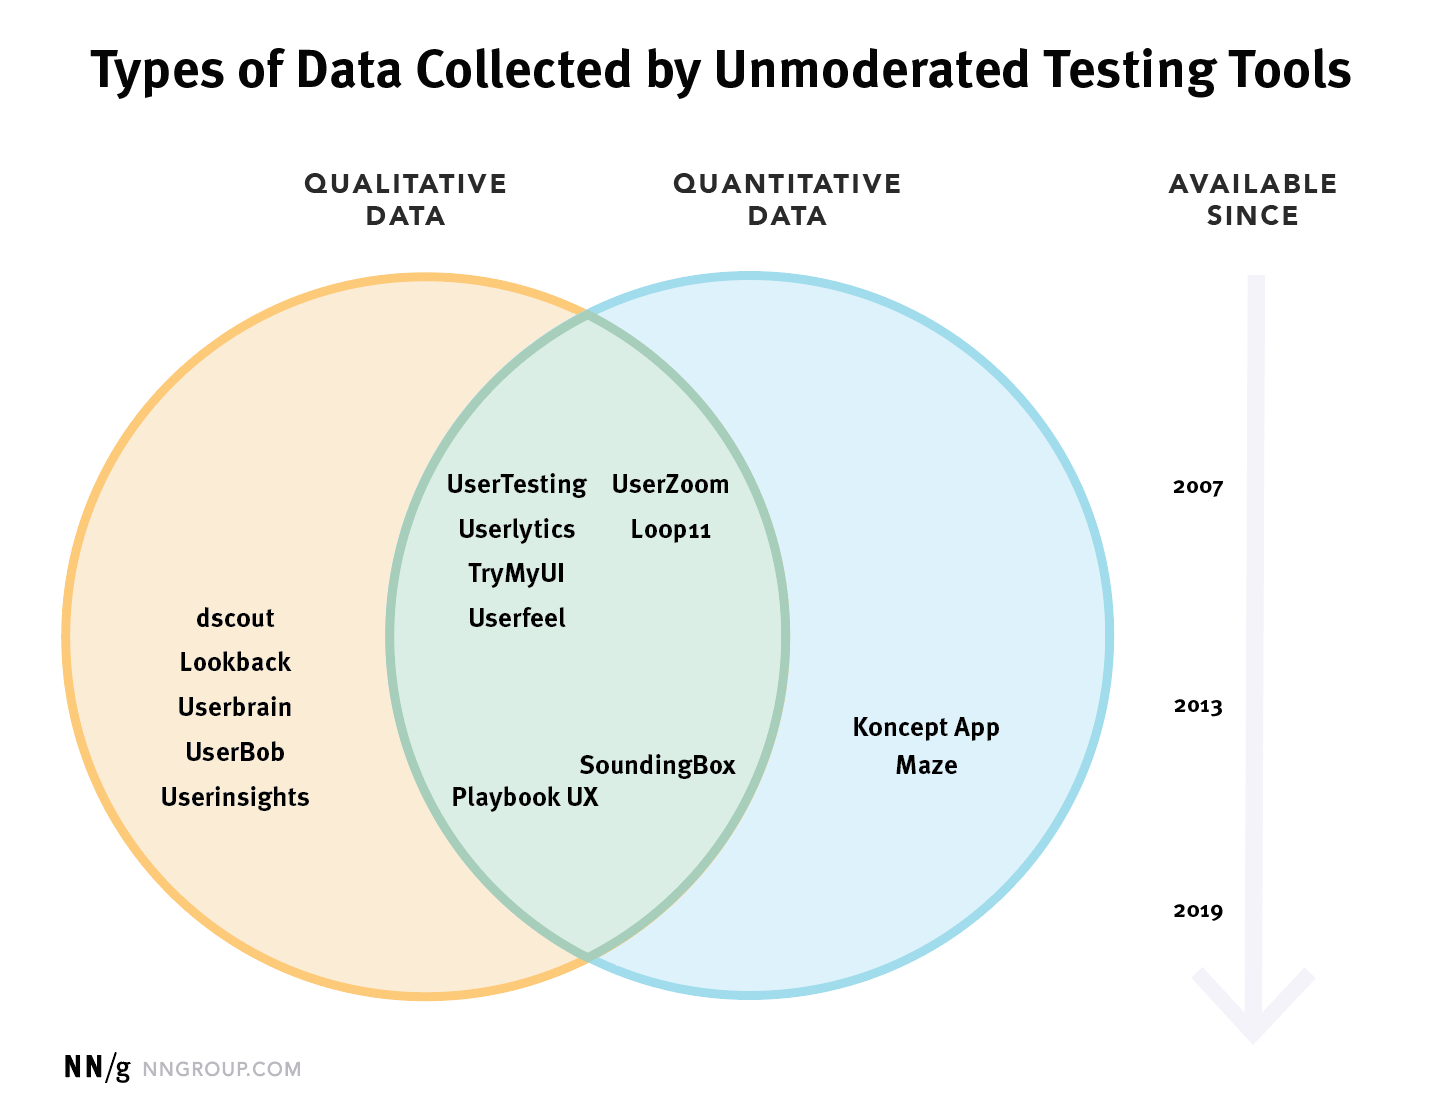 A venn diagram showing the types of data collected by unmoderated testing tools.